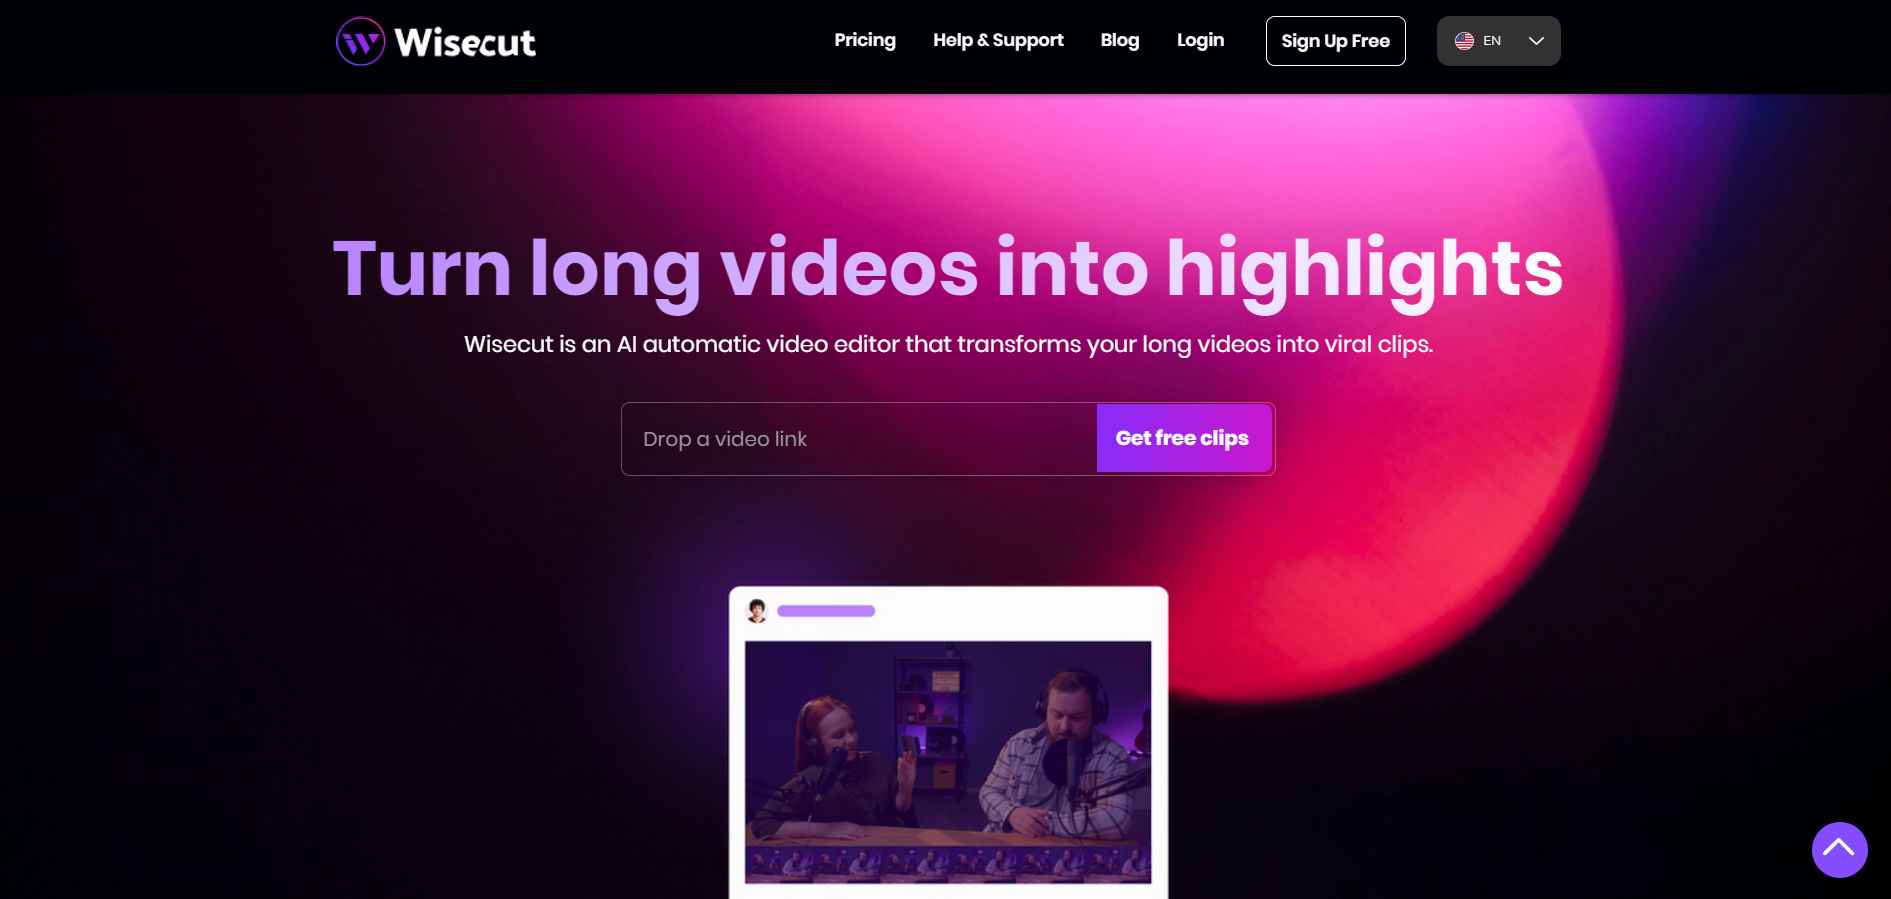 wisecut-homepage-turn-long-videos-into-highlights